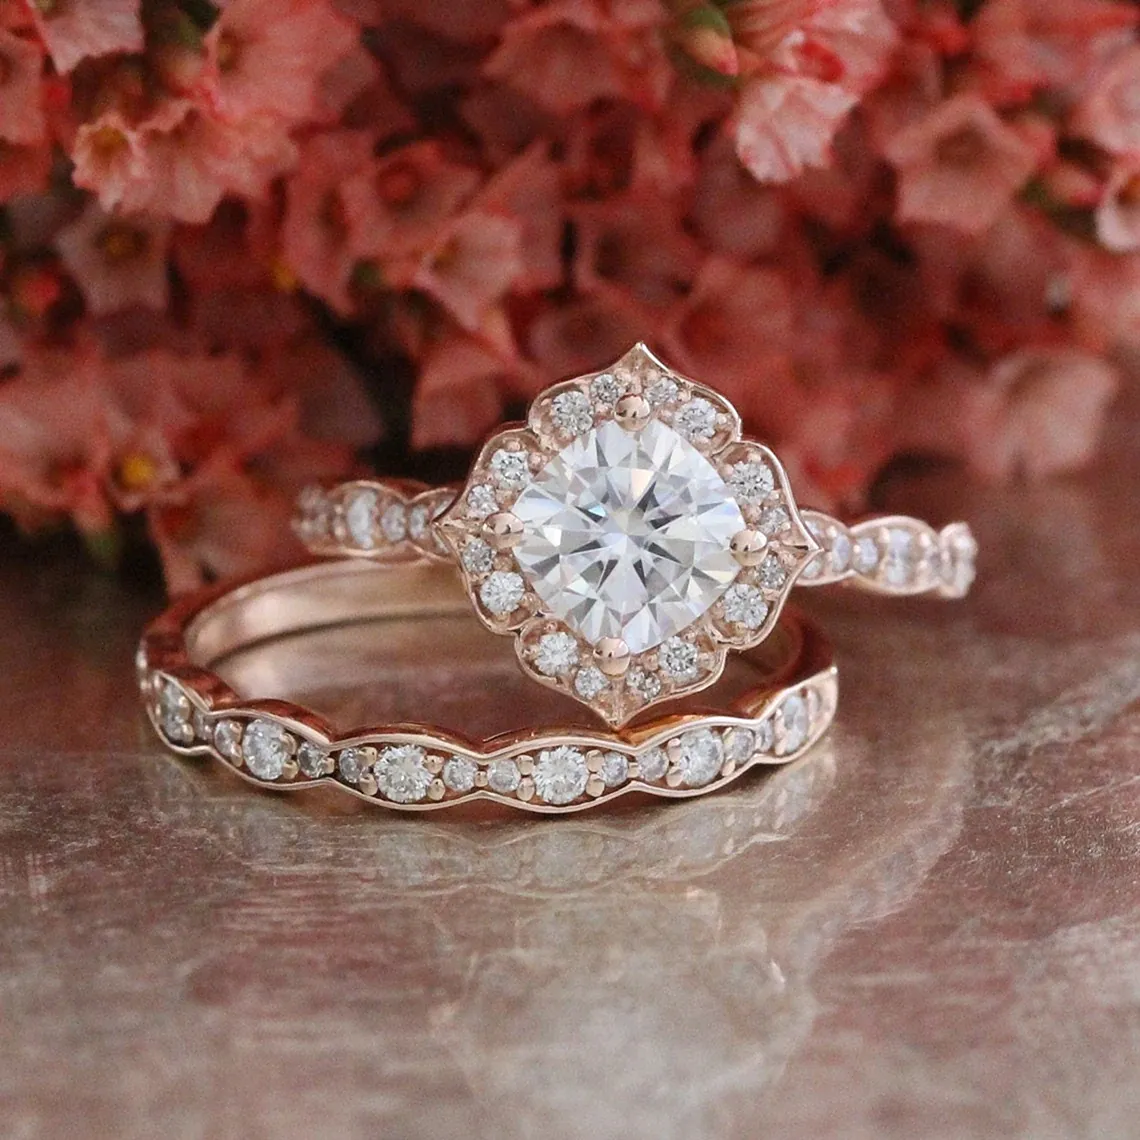 Vintage Engagement Rings with Various Shapes and Colors